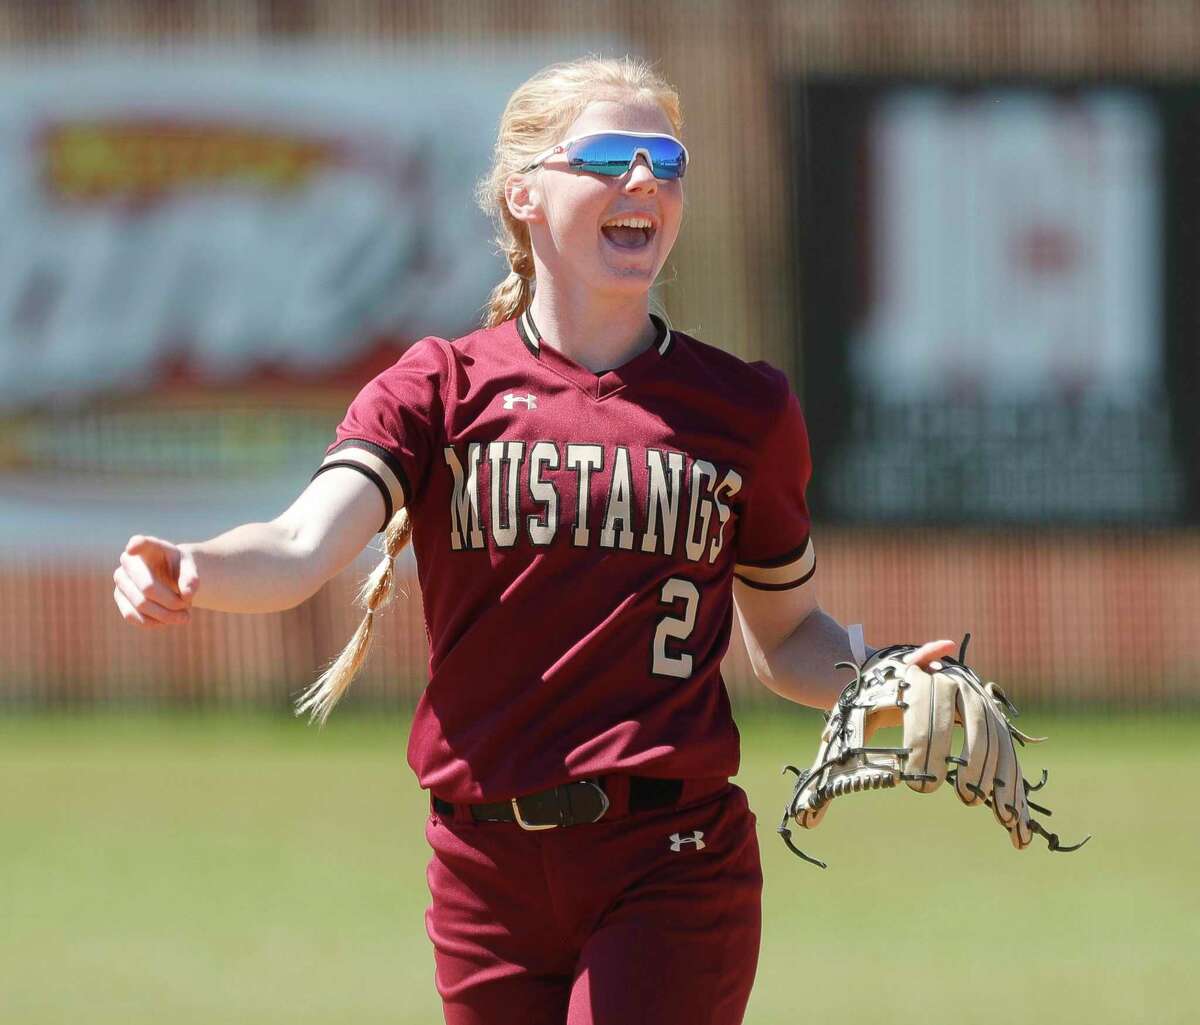 Magnolia West shortstop Hailey Toney (2) reacts after turning a double play in the second inning of a District 19-5A high school softball game at Magnolia West High School, Saturday, March 19, 2022, in Magnolia.